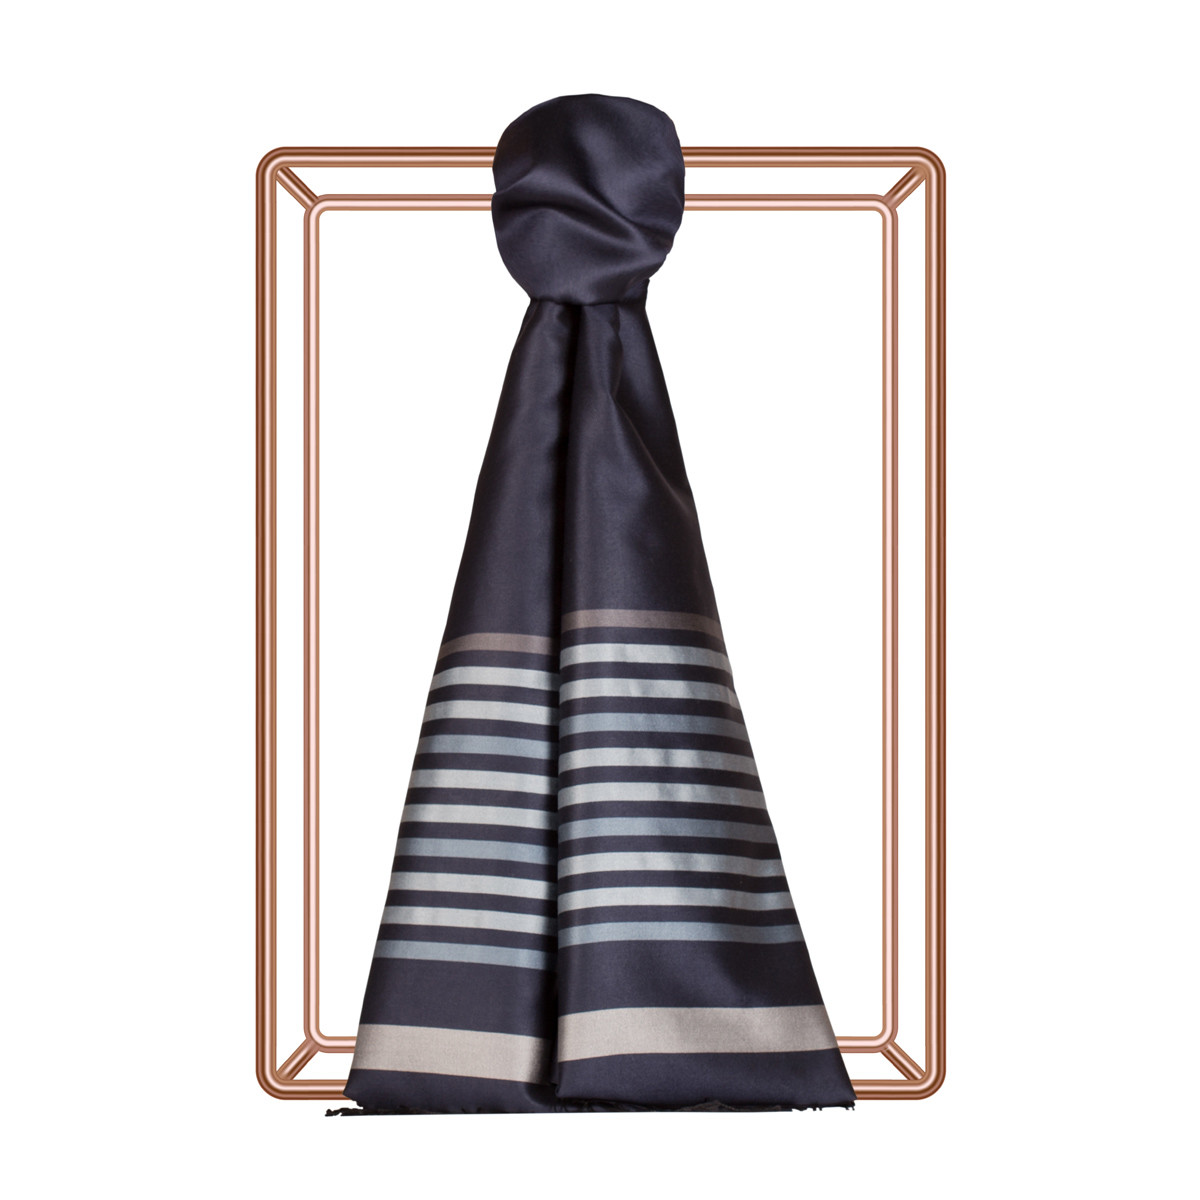 navy and silver scarf